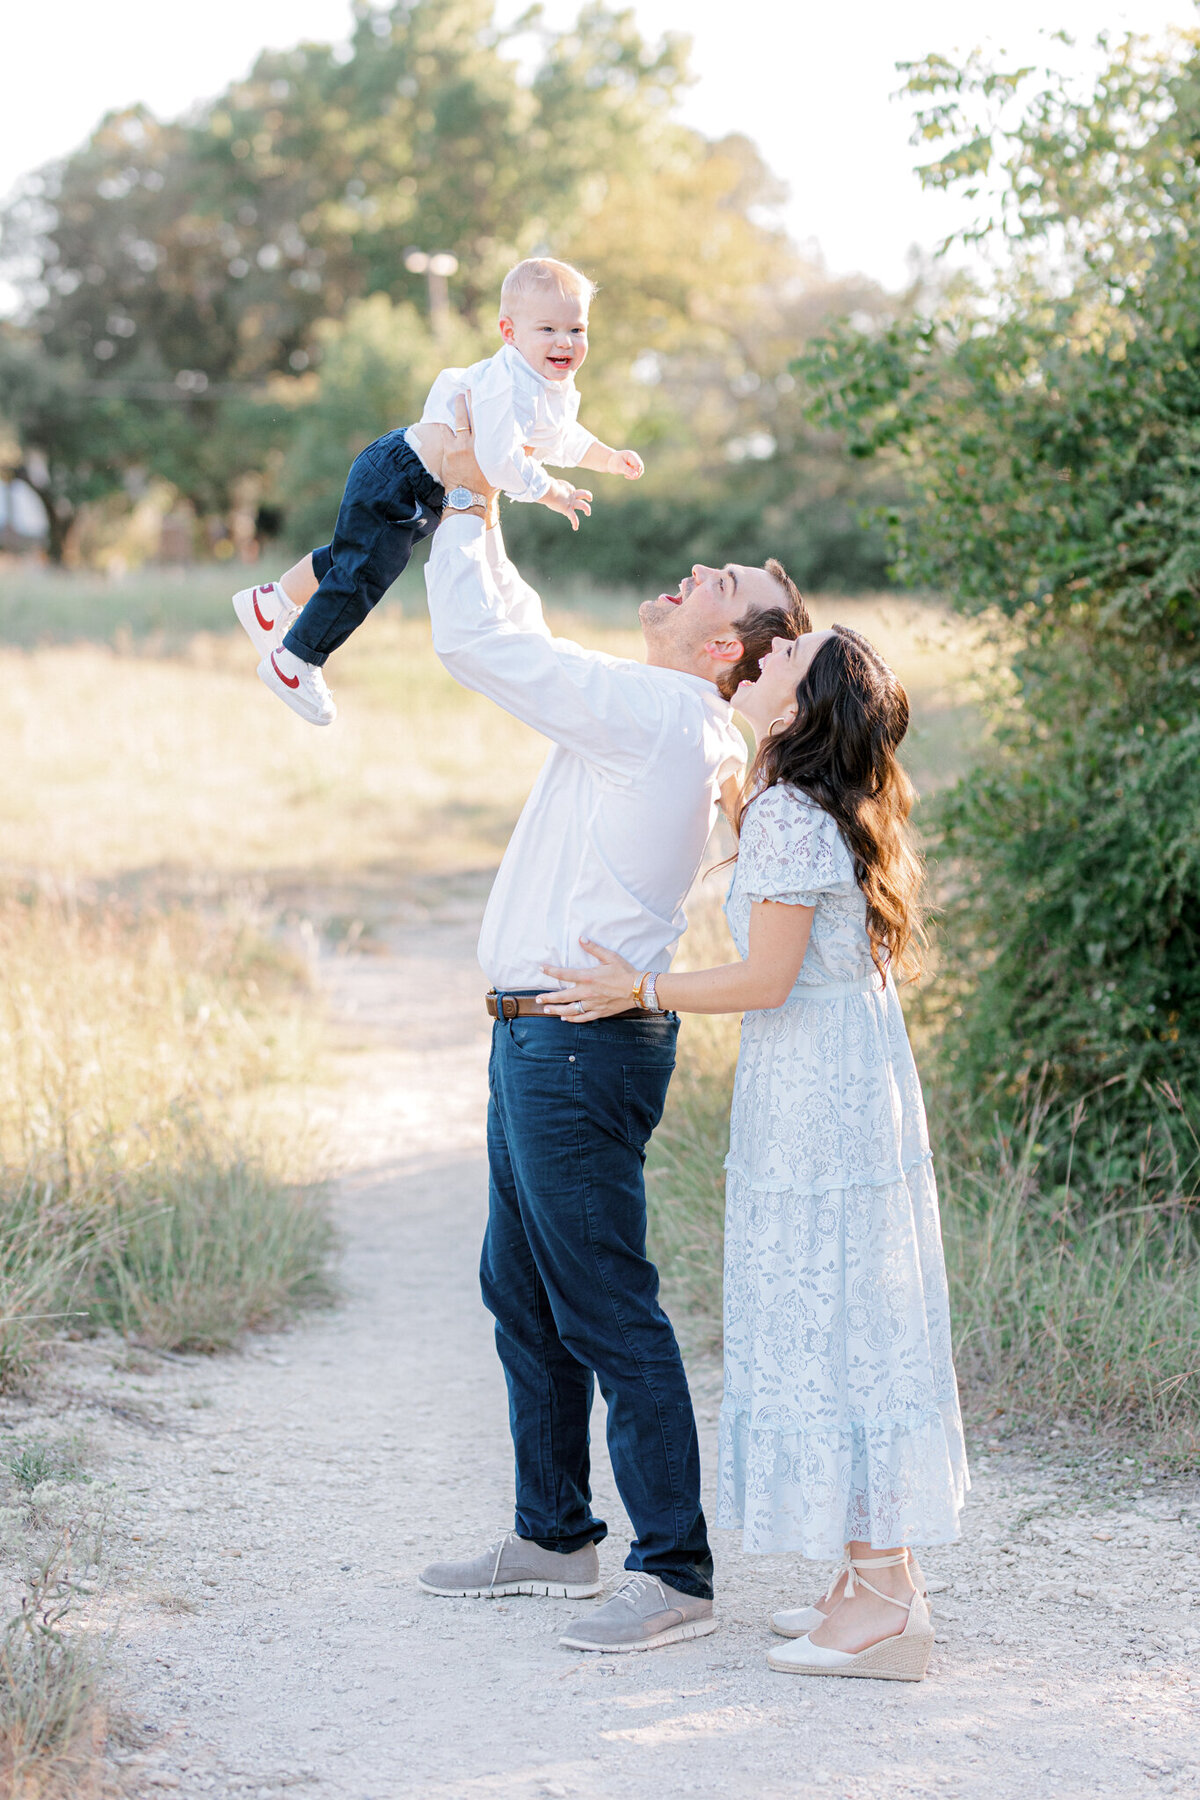 Fall Mini Sessions at Norbuck Park | Dallas Family Photographer | Sami Kathryn Photography | Oct 2022-9